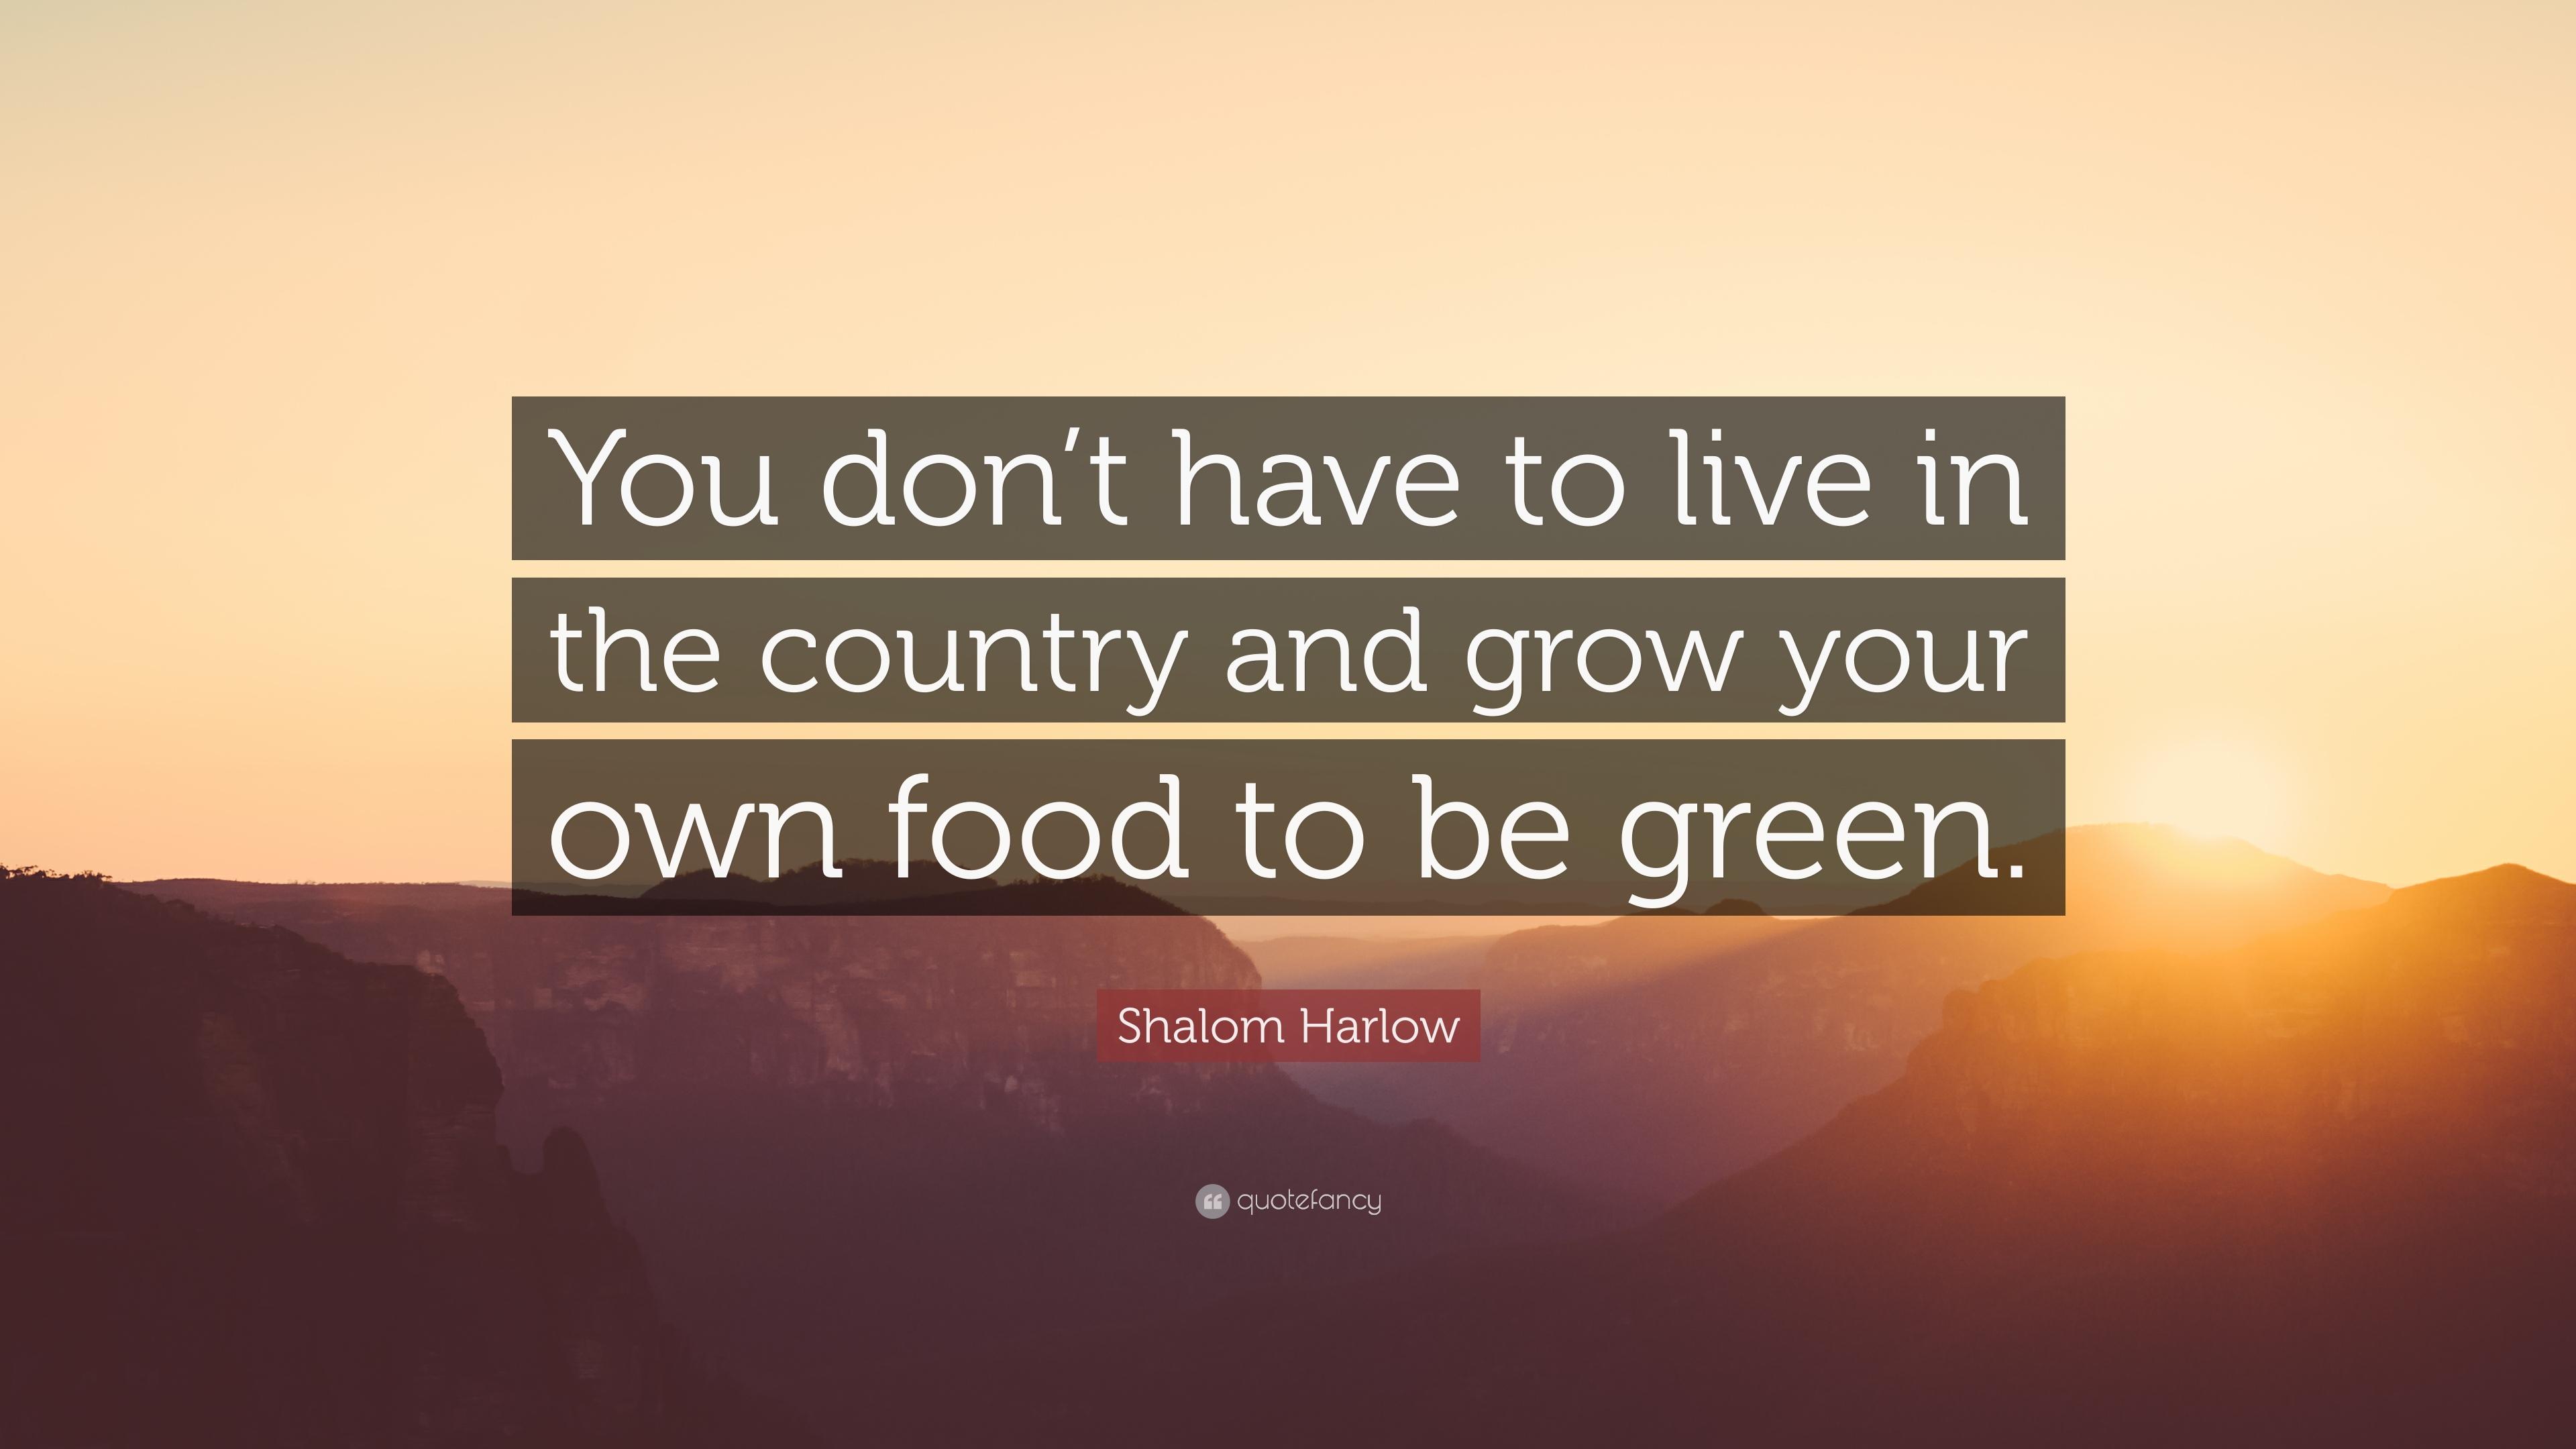 Shalom Harlow Quote: “You don't have to live in the country and grow